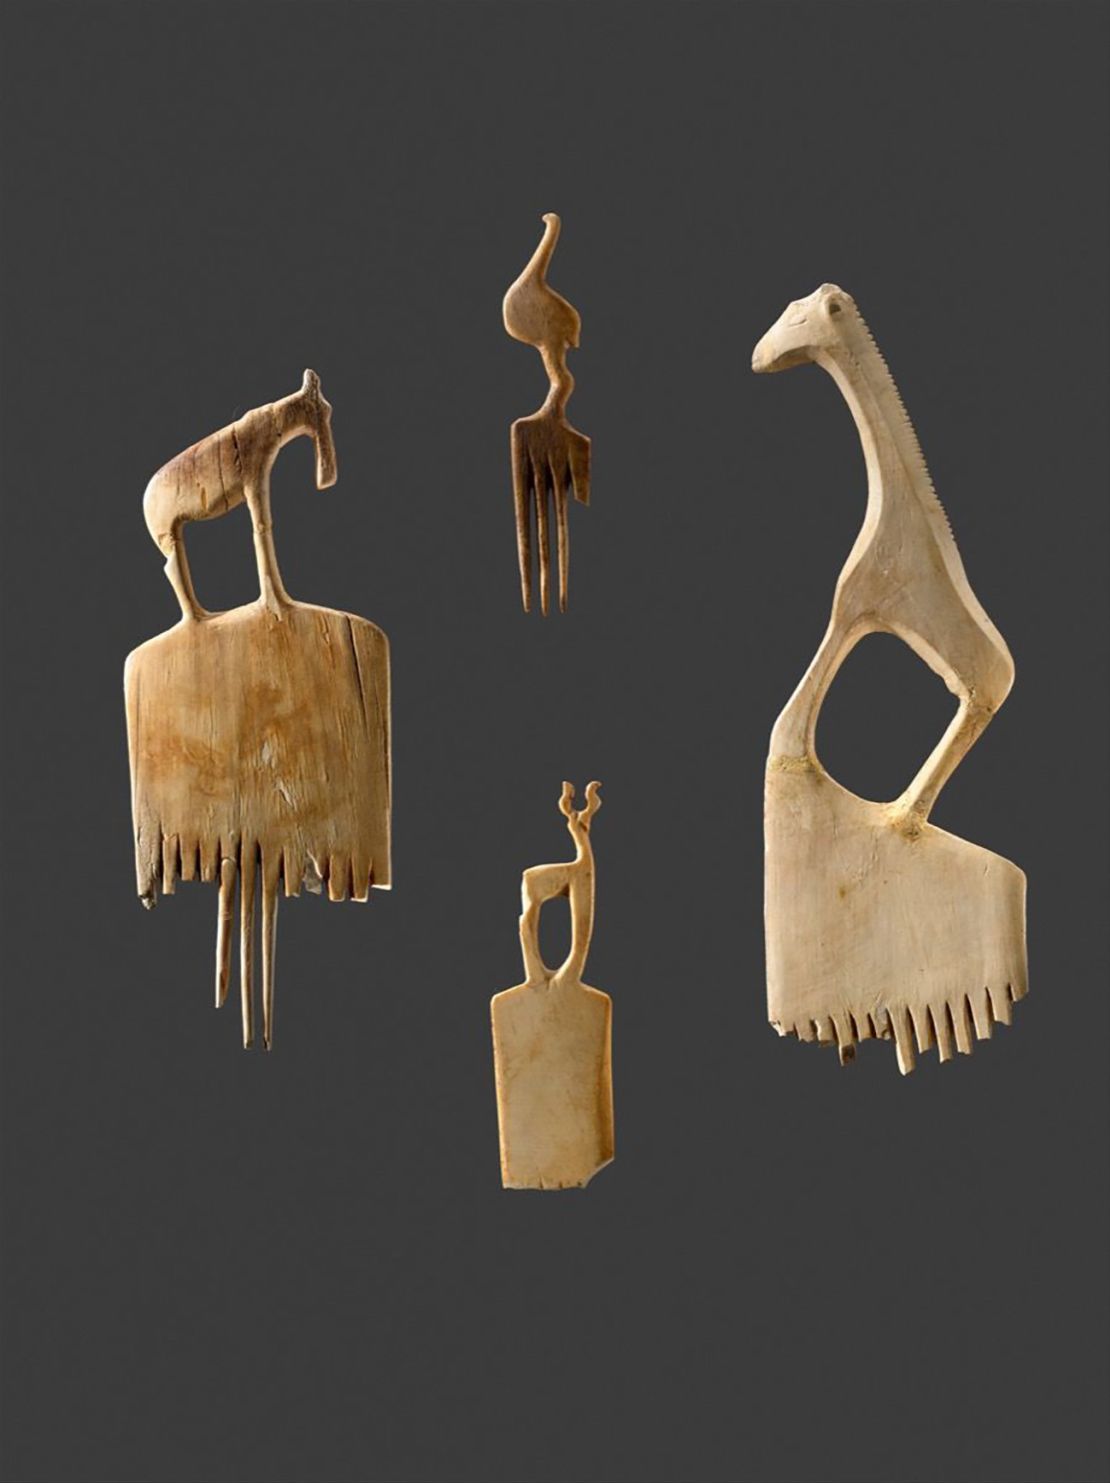 Combs with Carved Animals, ca. 3900-3500 B.C.